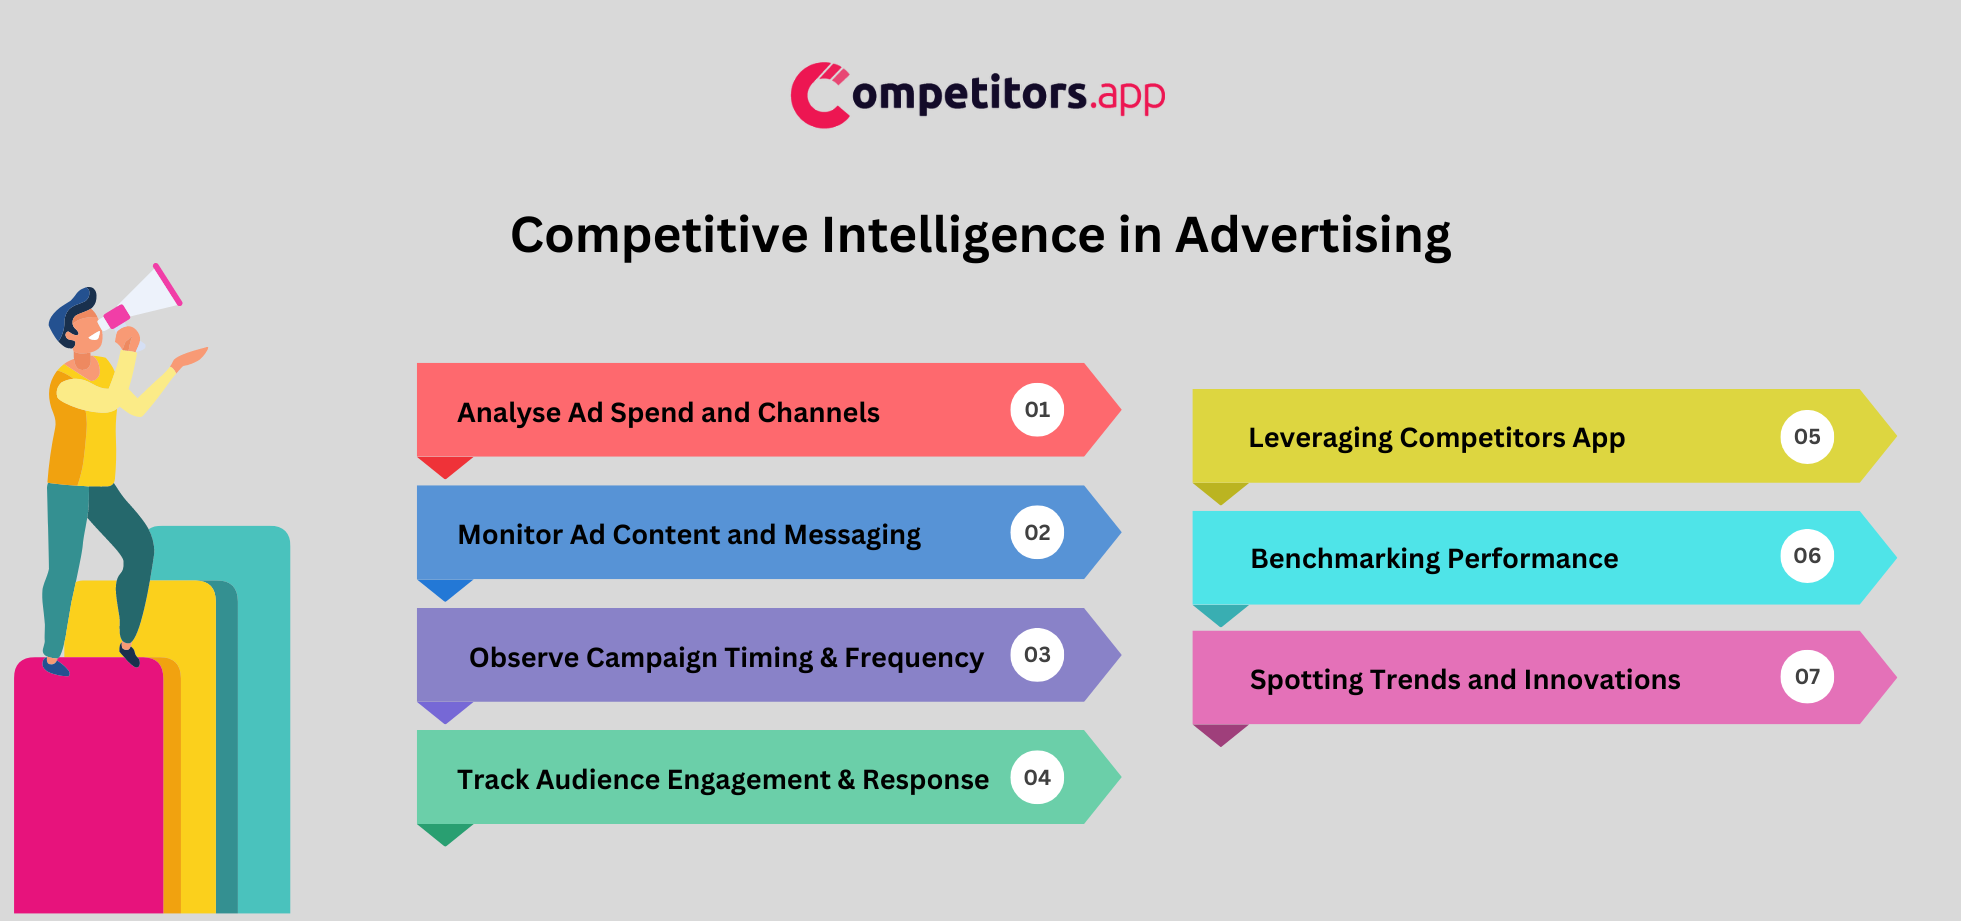 competitive intelligence in advertising competitors app